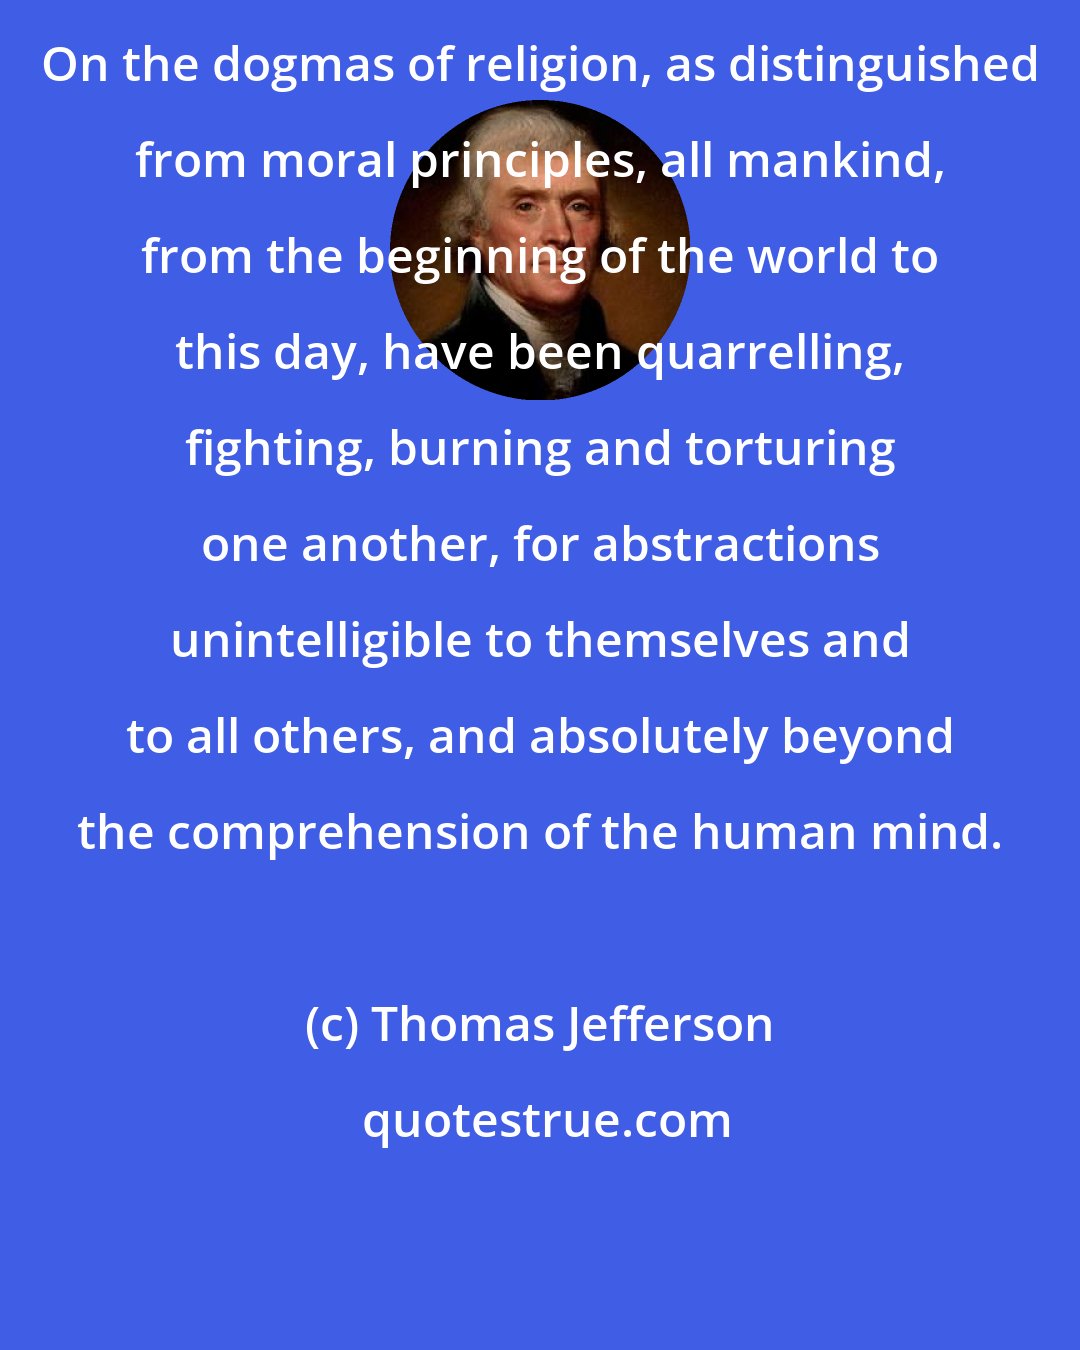 Thomas Jefferson: On the dogmas of religion, as distinguished from moral principles, all mankind, from the beginning of the world to this day, have been quarrelling, fighting, burning and torturing one another, for abstractions unintelligible to themselves and to all others, and absolutely beyond the comprehension of the human mind.